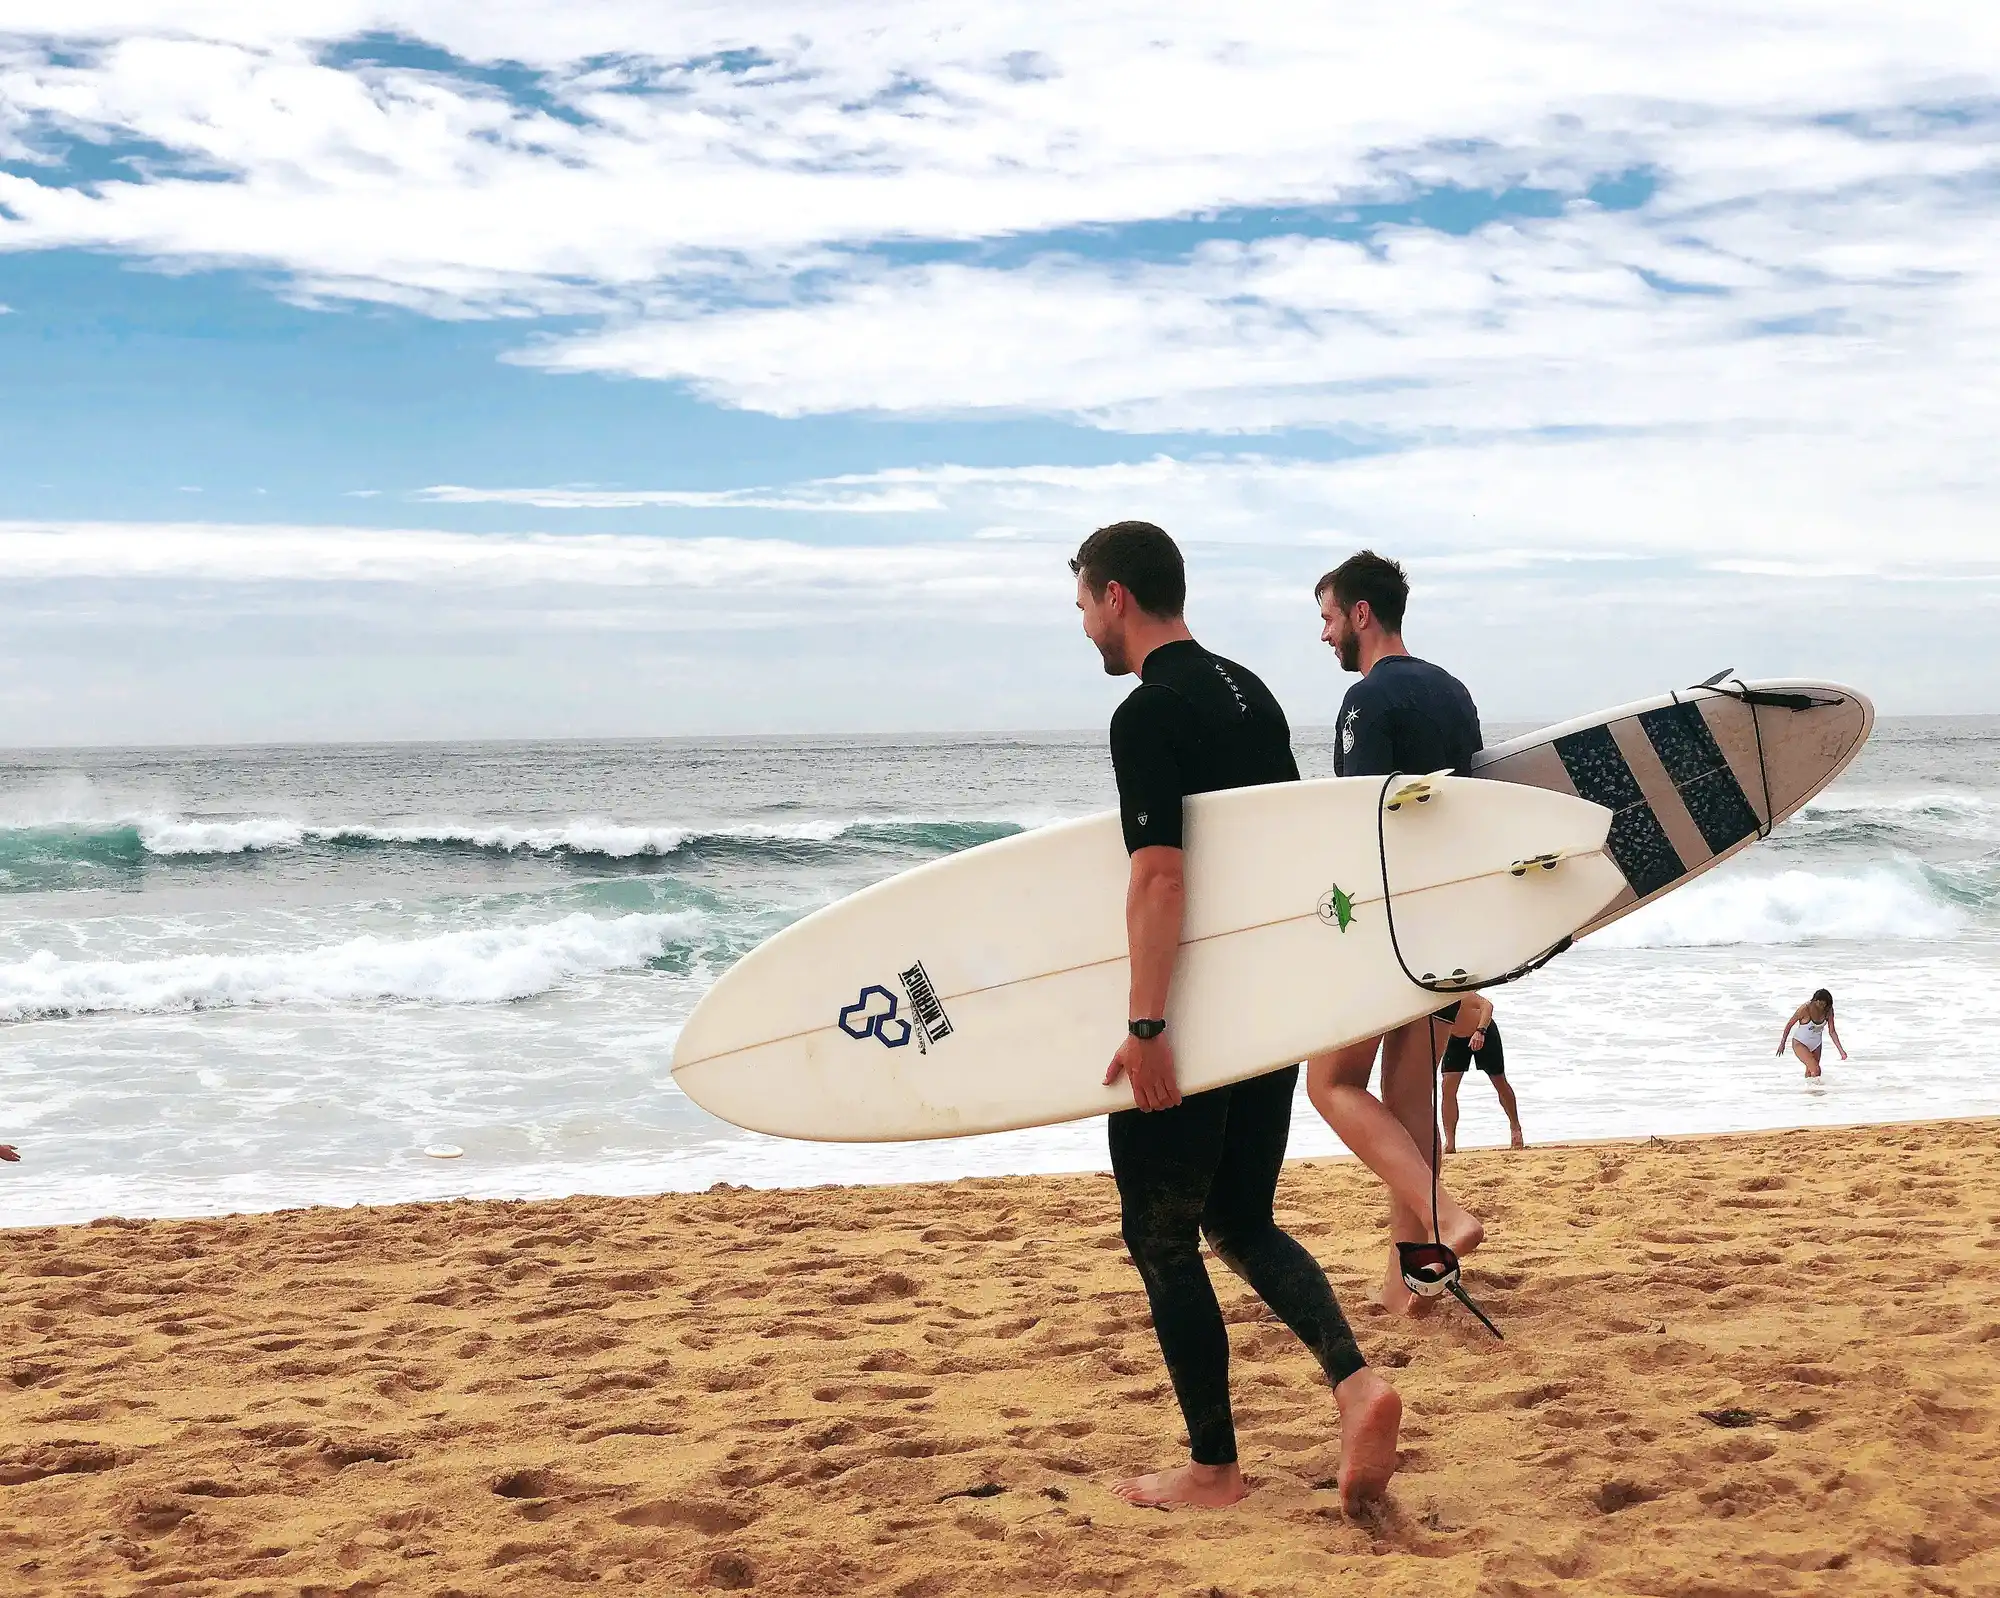 Surfing for beginners in the Landes